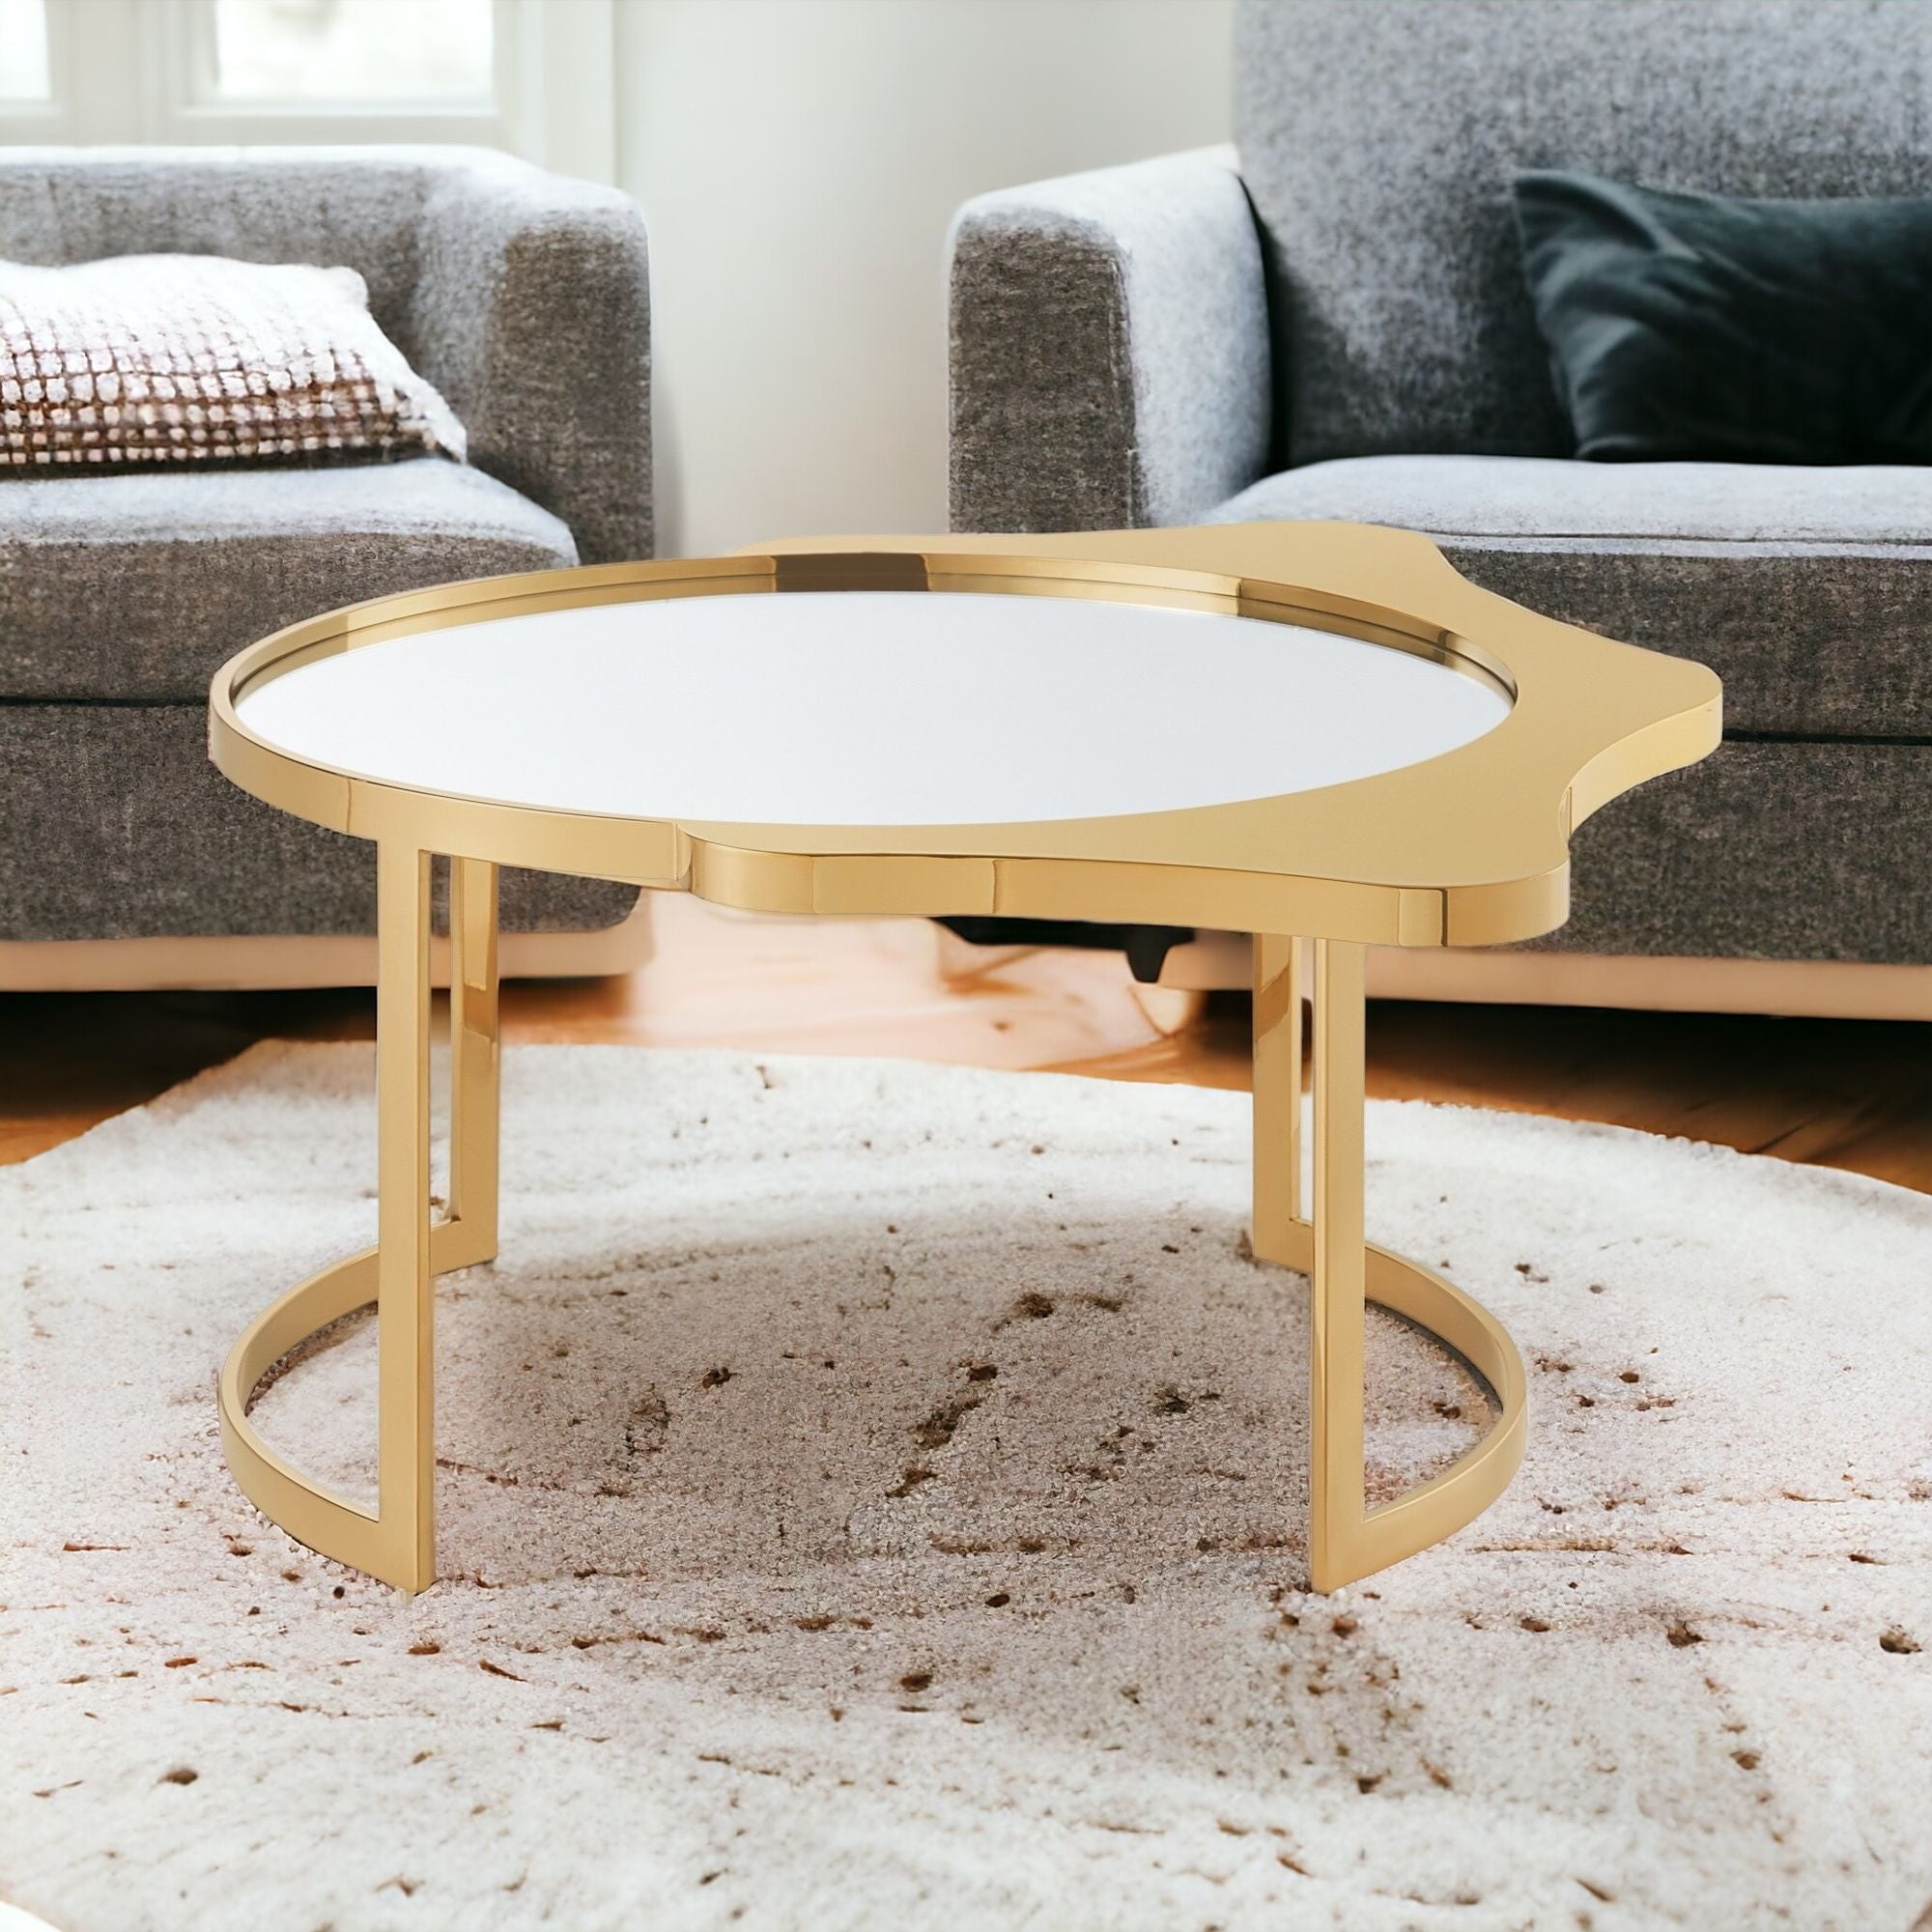 32" Gold Glass And Stainless Steel Round Mirrored Coffee Table